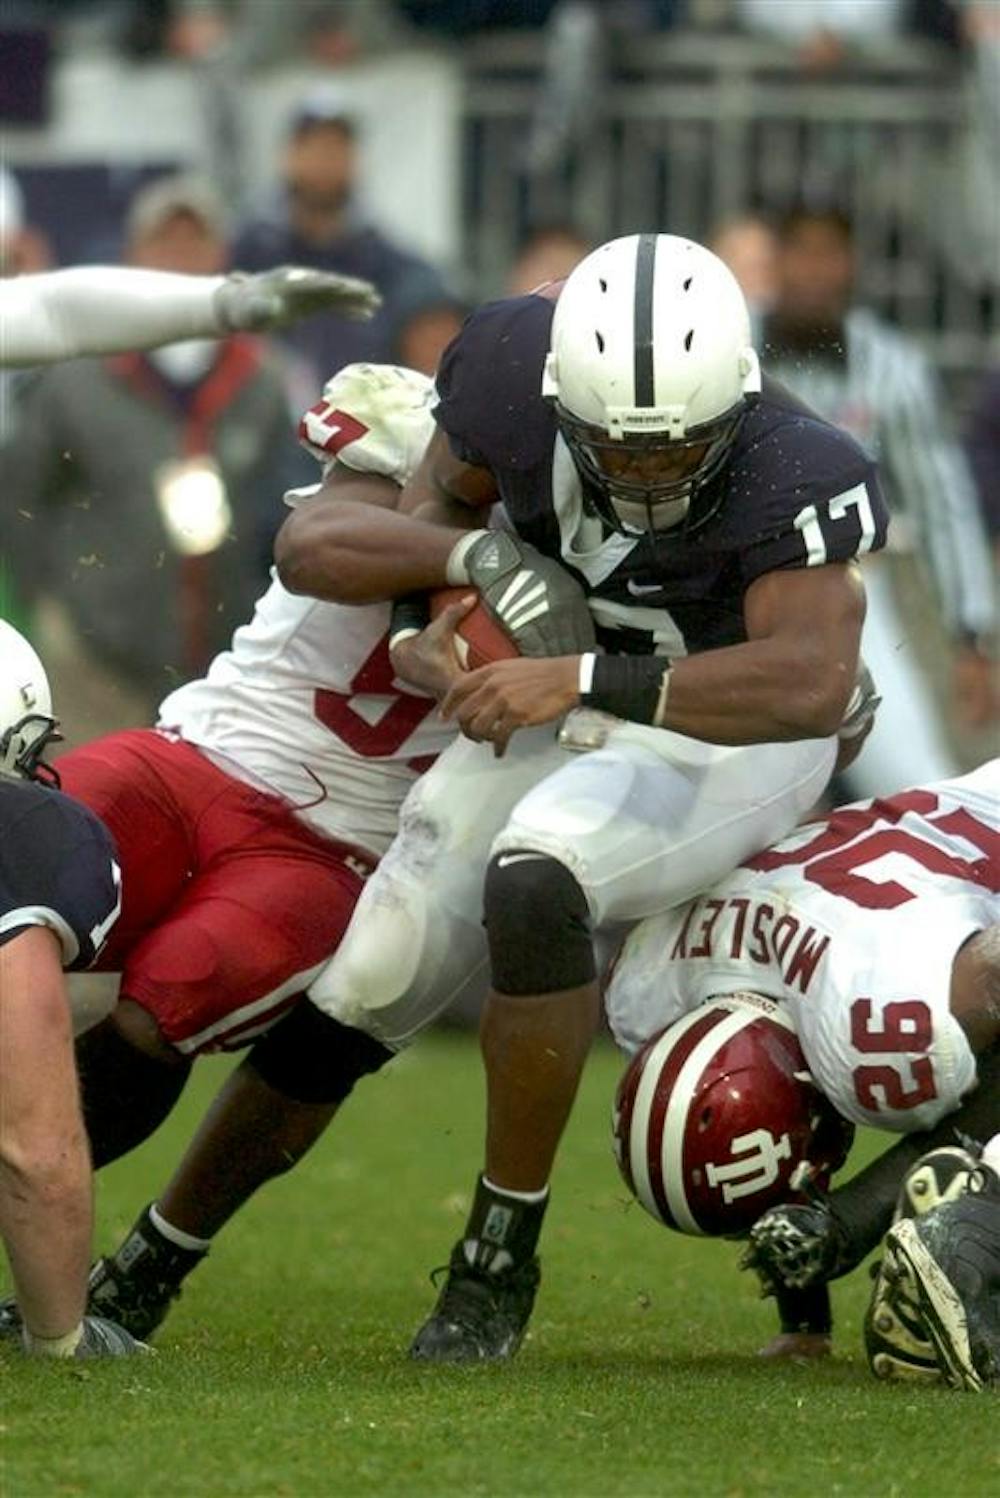 Penn State's Daryll Clark gets tackled by two IU defenders during the Nittany Lions' win over IU Saturday.